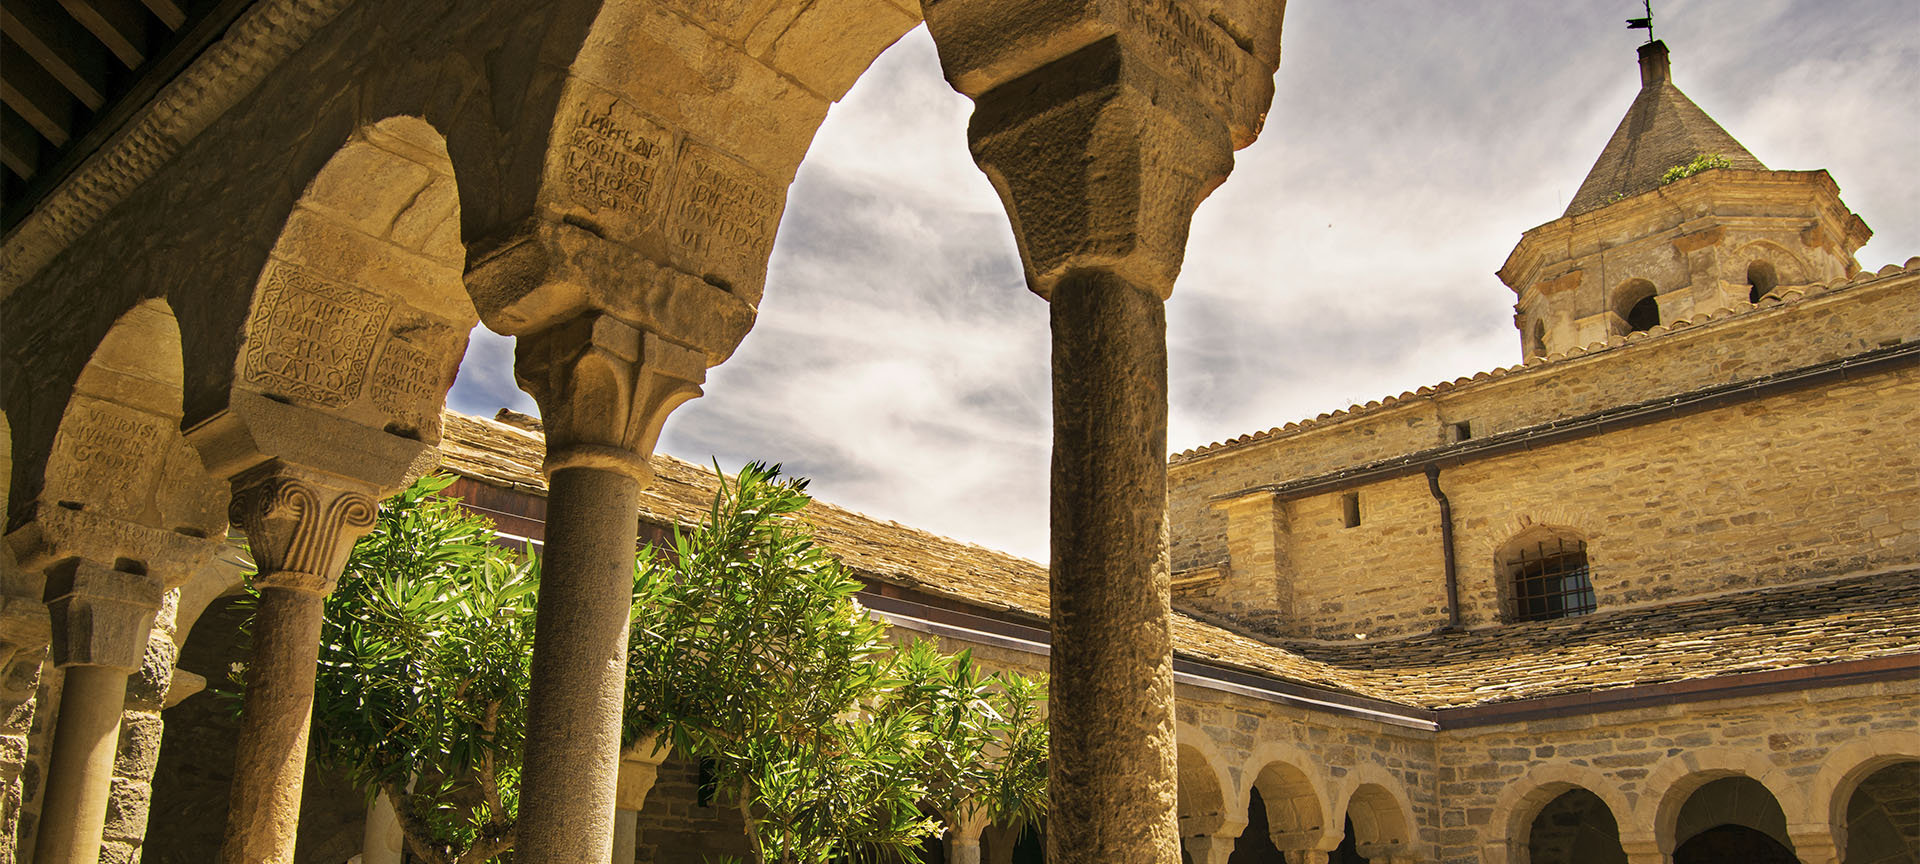 Cloister of the cathedral of San Vicente in Roda de Isábena, in Huesca (Aragon)